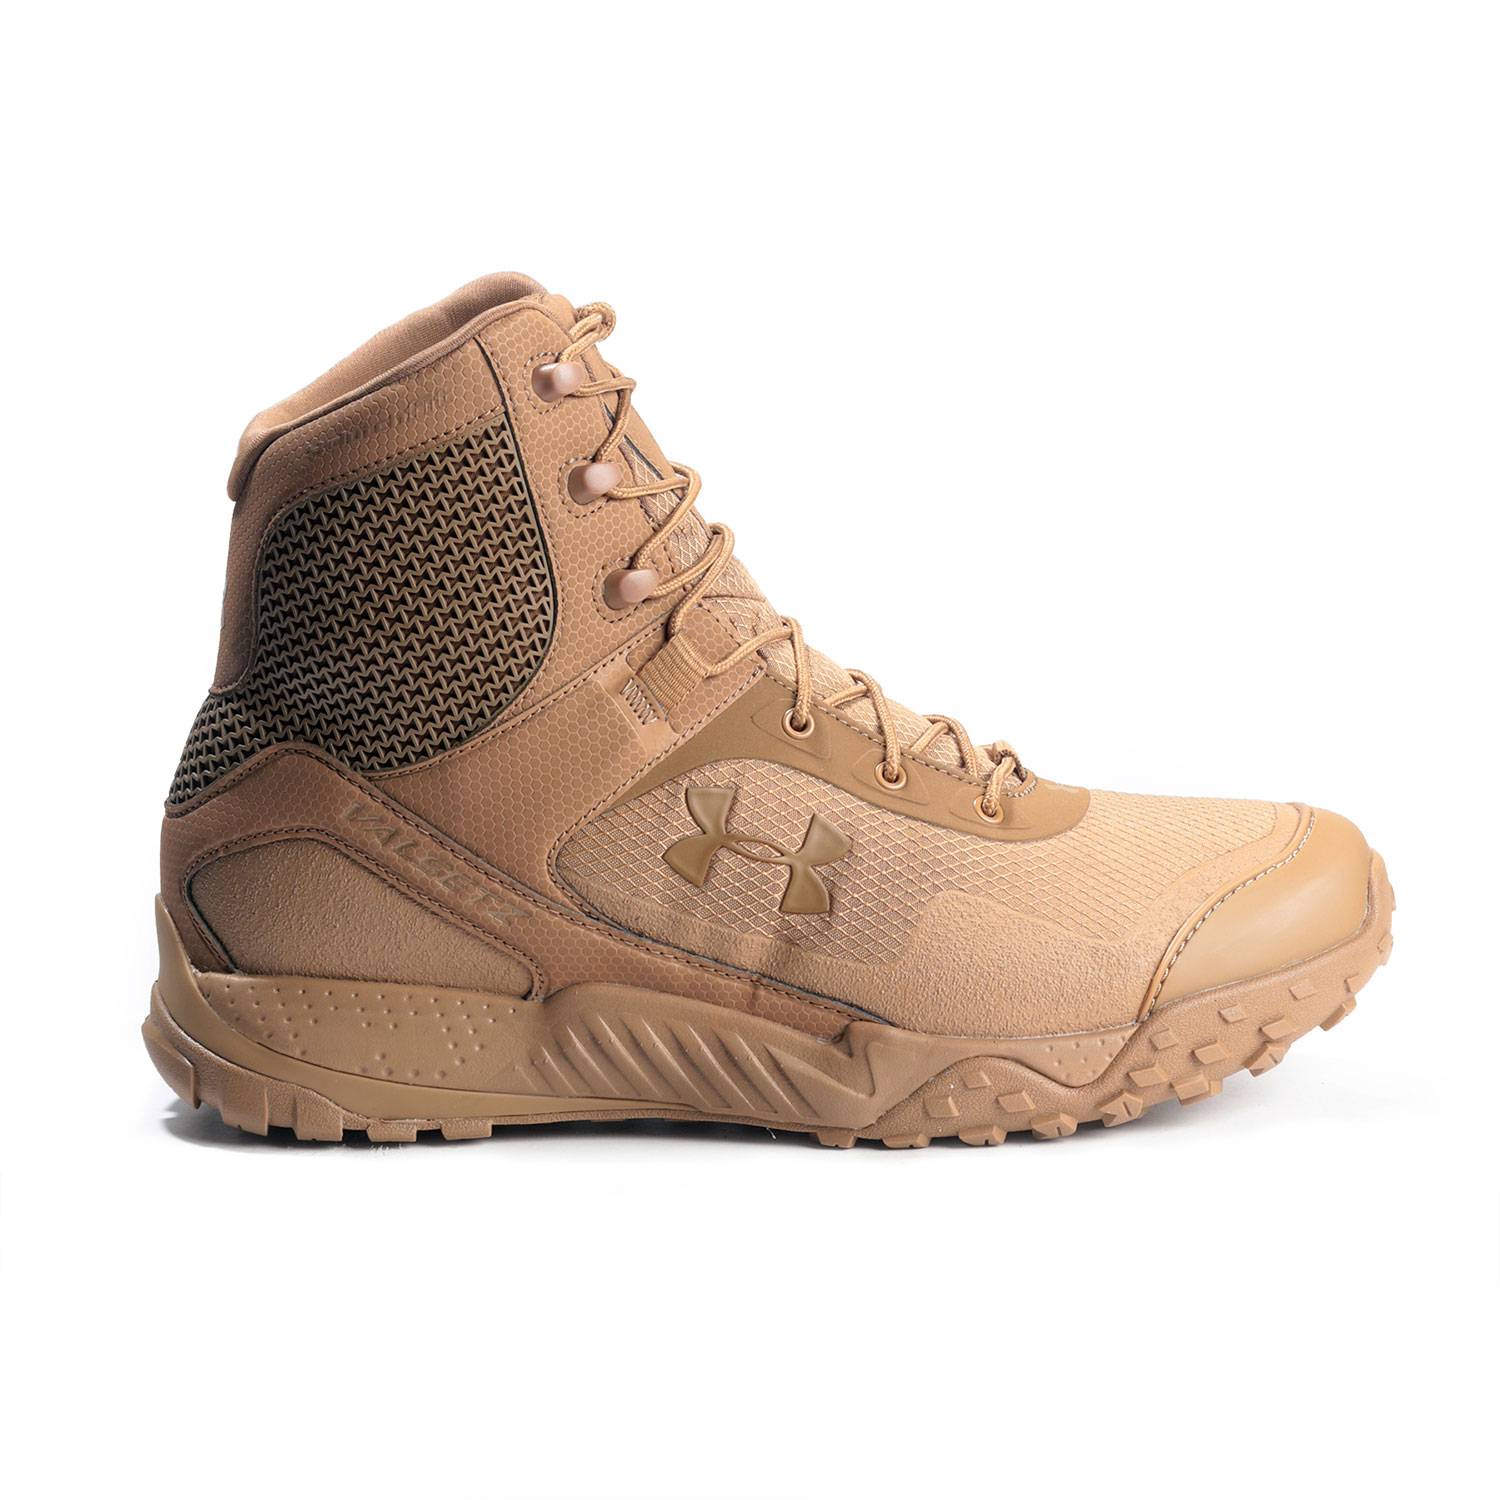 underarmour work boots